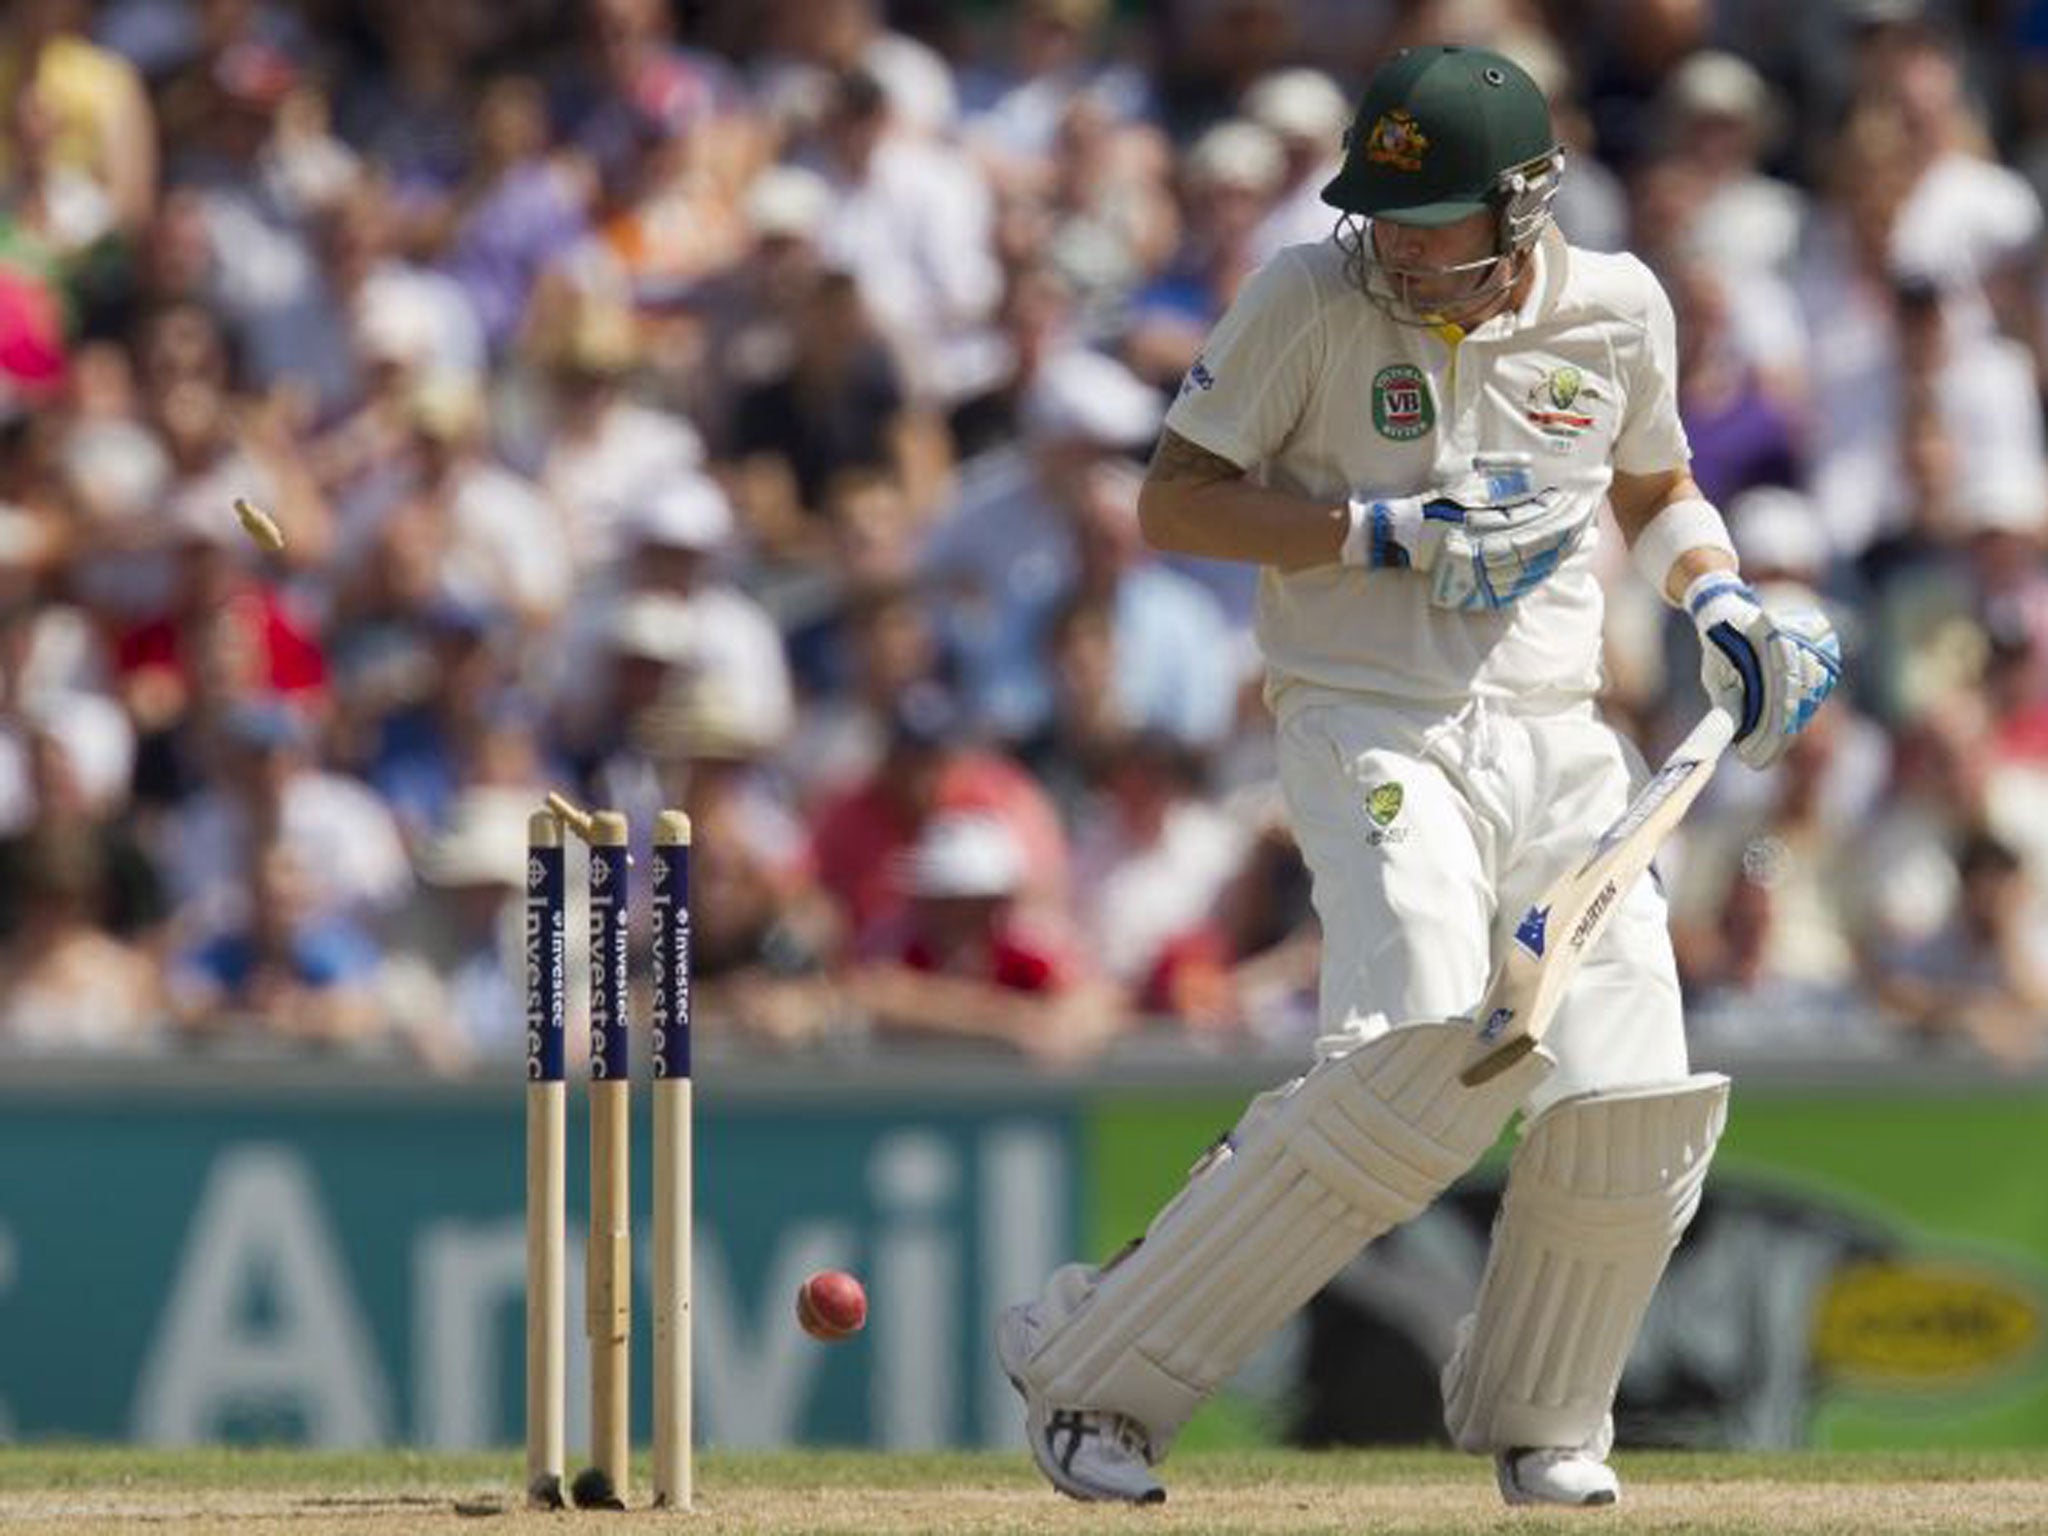 Michael Clarke reacts after he is bowled for 187 by Stuart Broad